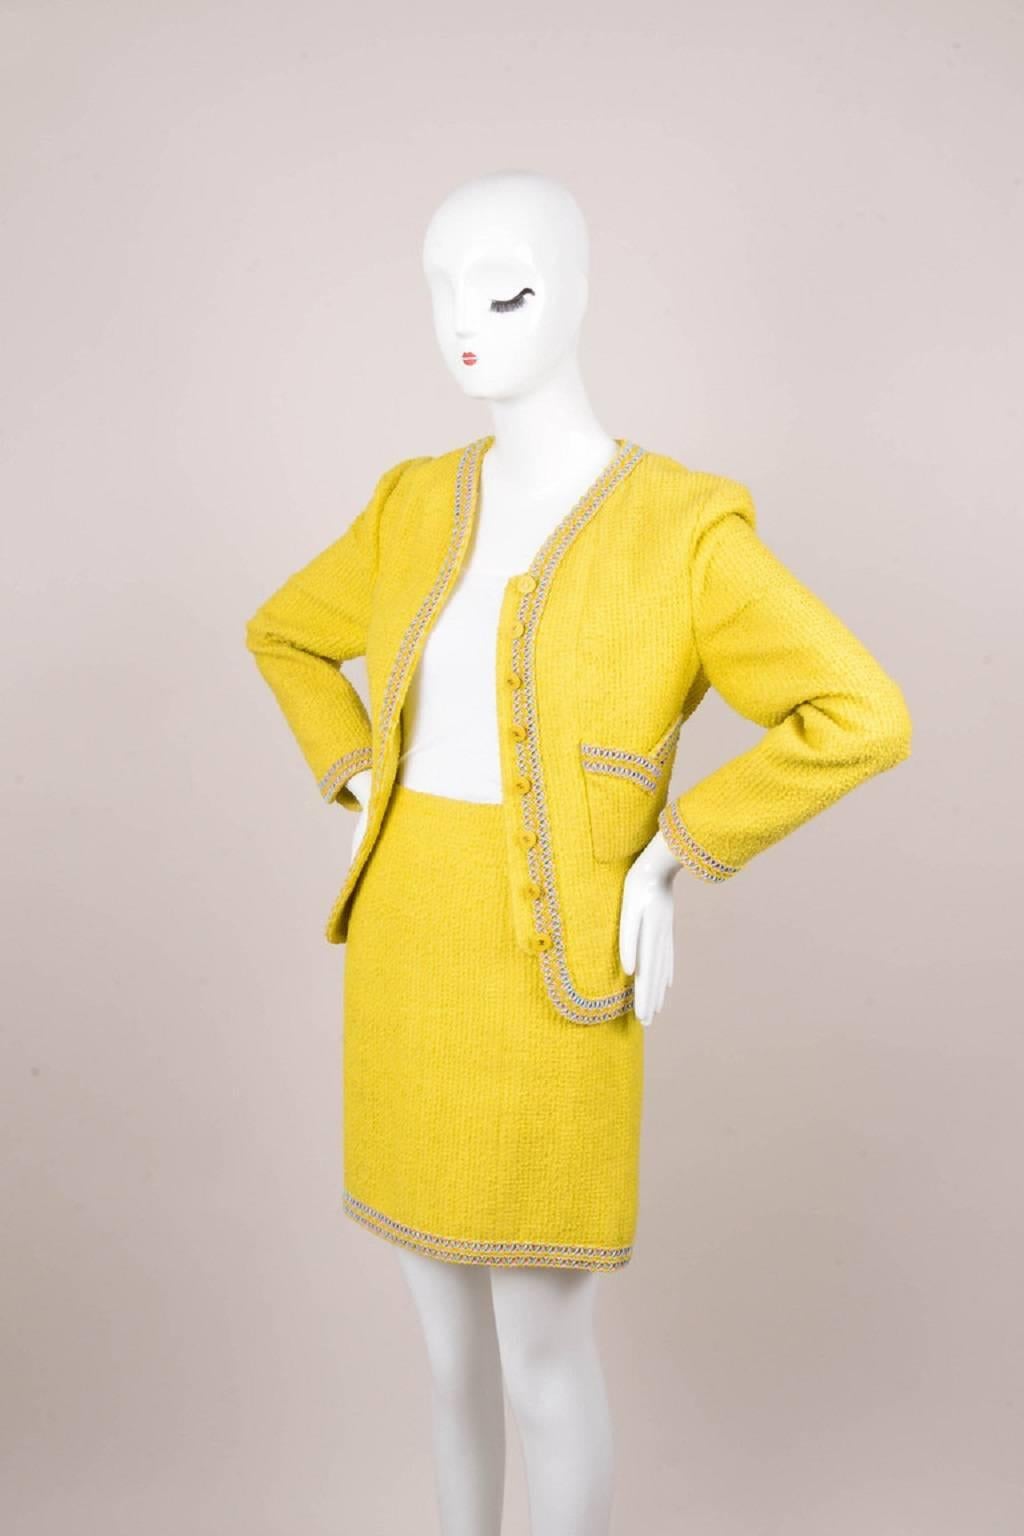 Size: 42
Color: Blue,Gold,Pink,White,Yellow,
Made In: France
Fabric Content: 58% Cotton, 39% Wool, 3% Nylon; Lining: 100% Silk

Item Specifics & Details: Make your day at the office a little brighter in this skirt suit by Chanel. The jacket is fully